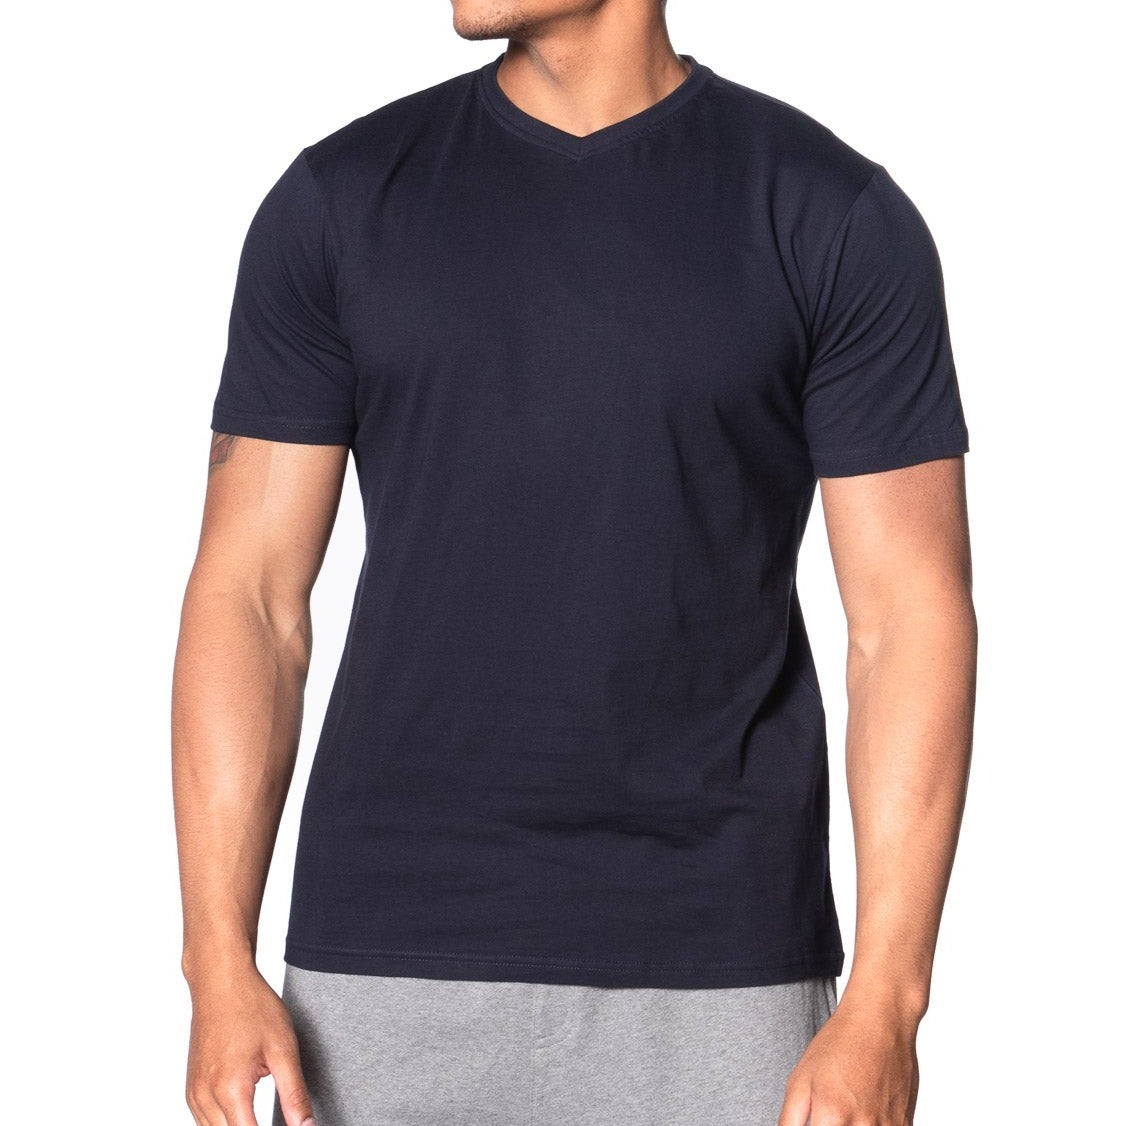 Fitted Vee Neck T-Shirt - Colors